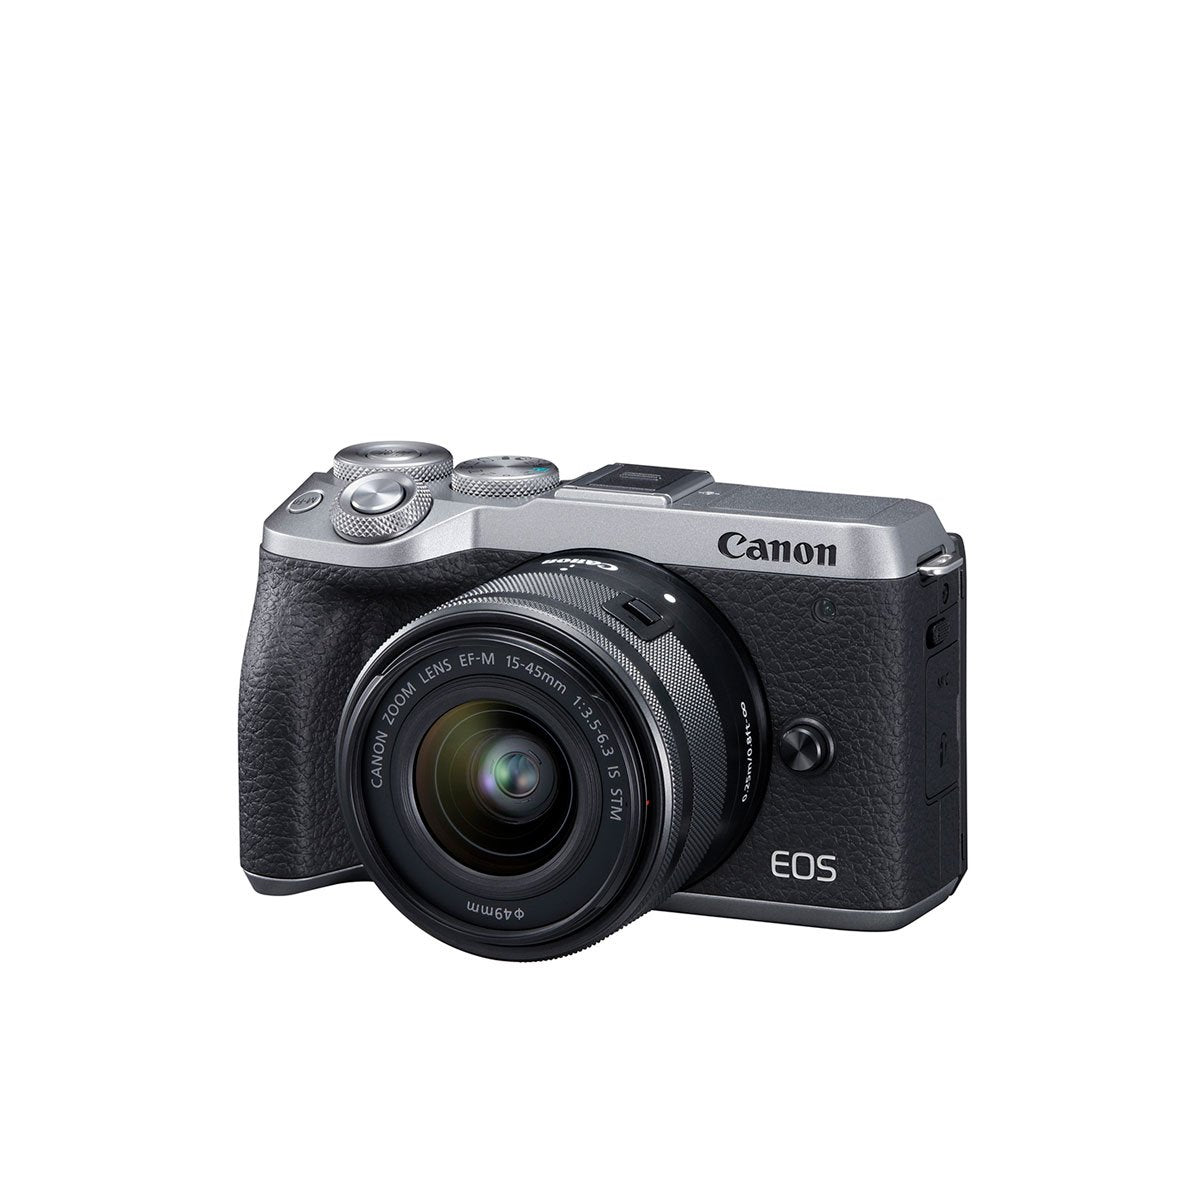 Canon EOS M6 Mark II Mirrorless Camera with EF-M 15-45mm IS STM Lens Specialty Kit (Silver)